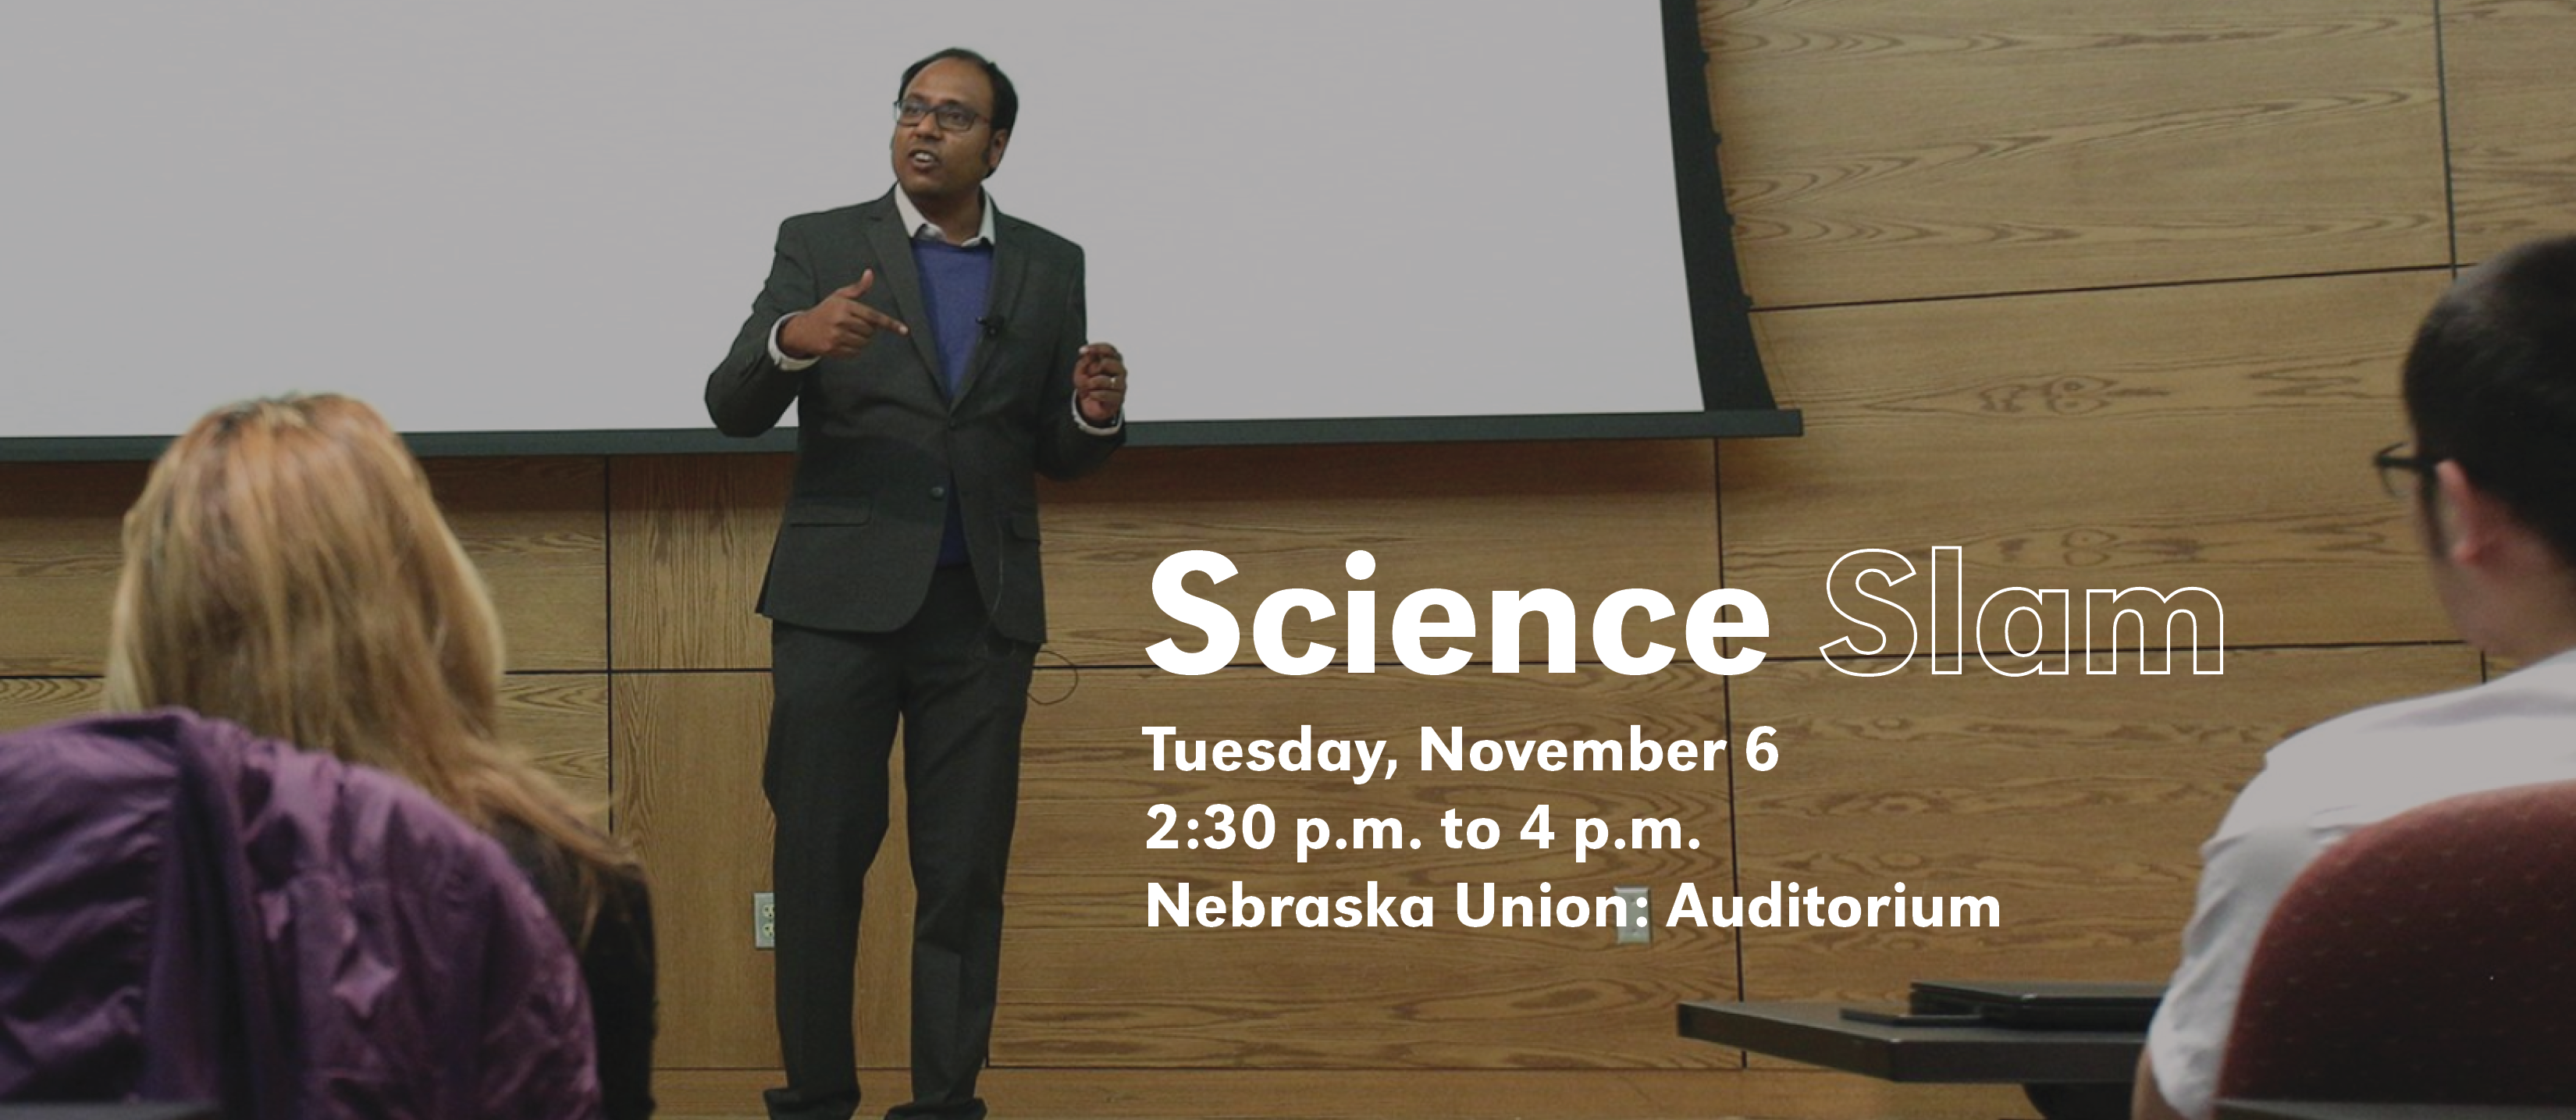 Watch the Science Slam on Tuesday, November 6 to hear about the latest research from eight postdoctoral researchers.